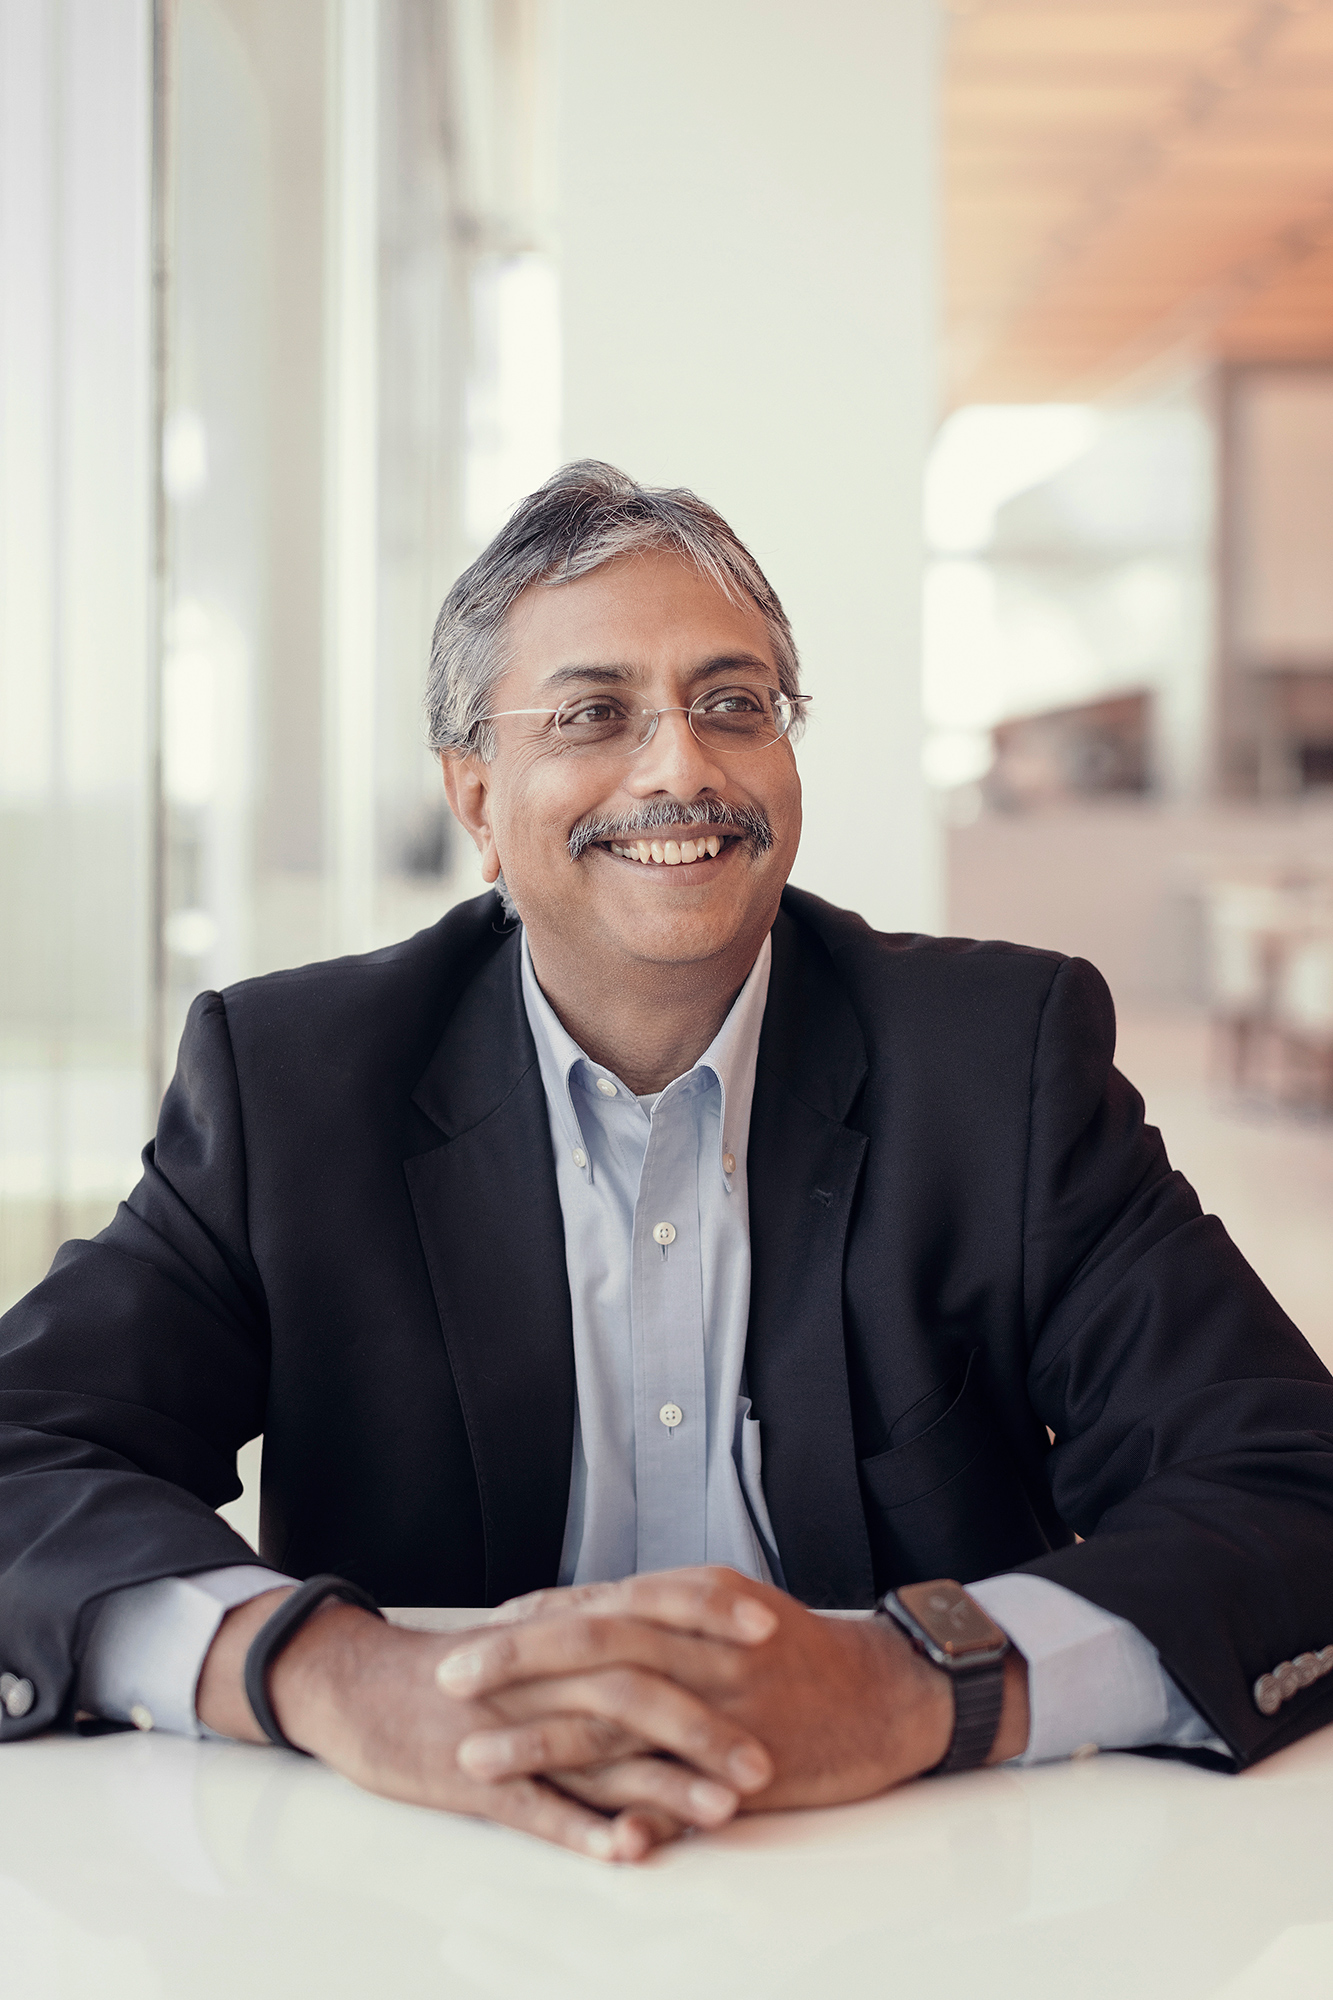 Vijay Swarup, Exxon-Mobil Vice President of Research and Development, photographed on location at the Exxon Springwoods Campus by photographer, Todd Spoth.